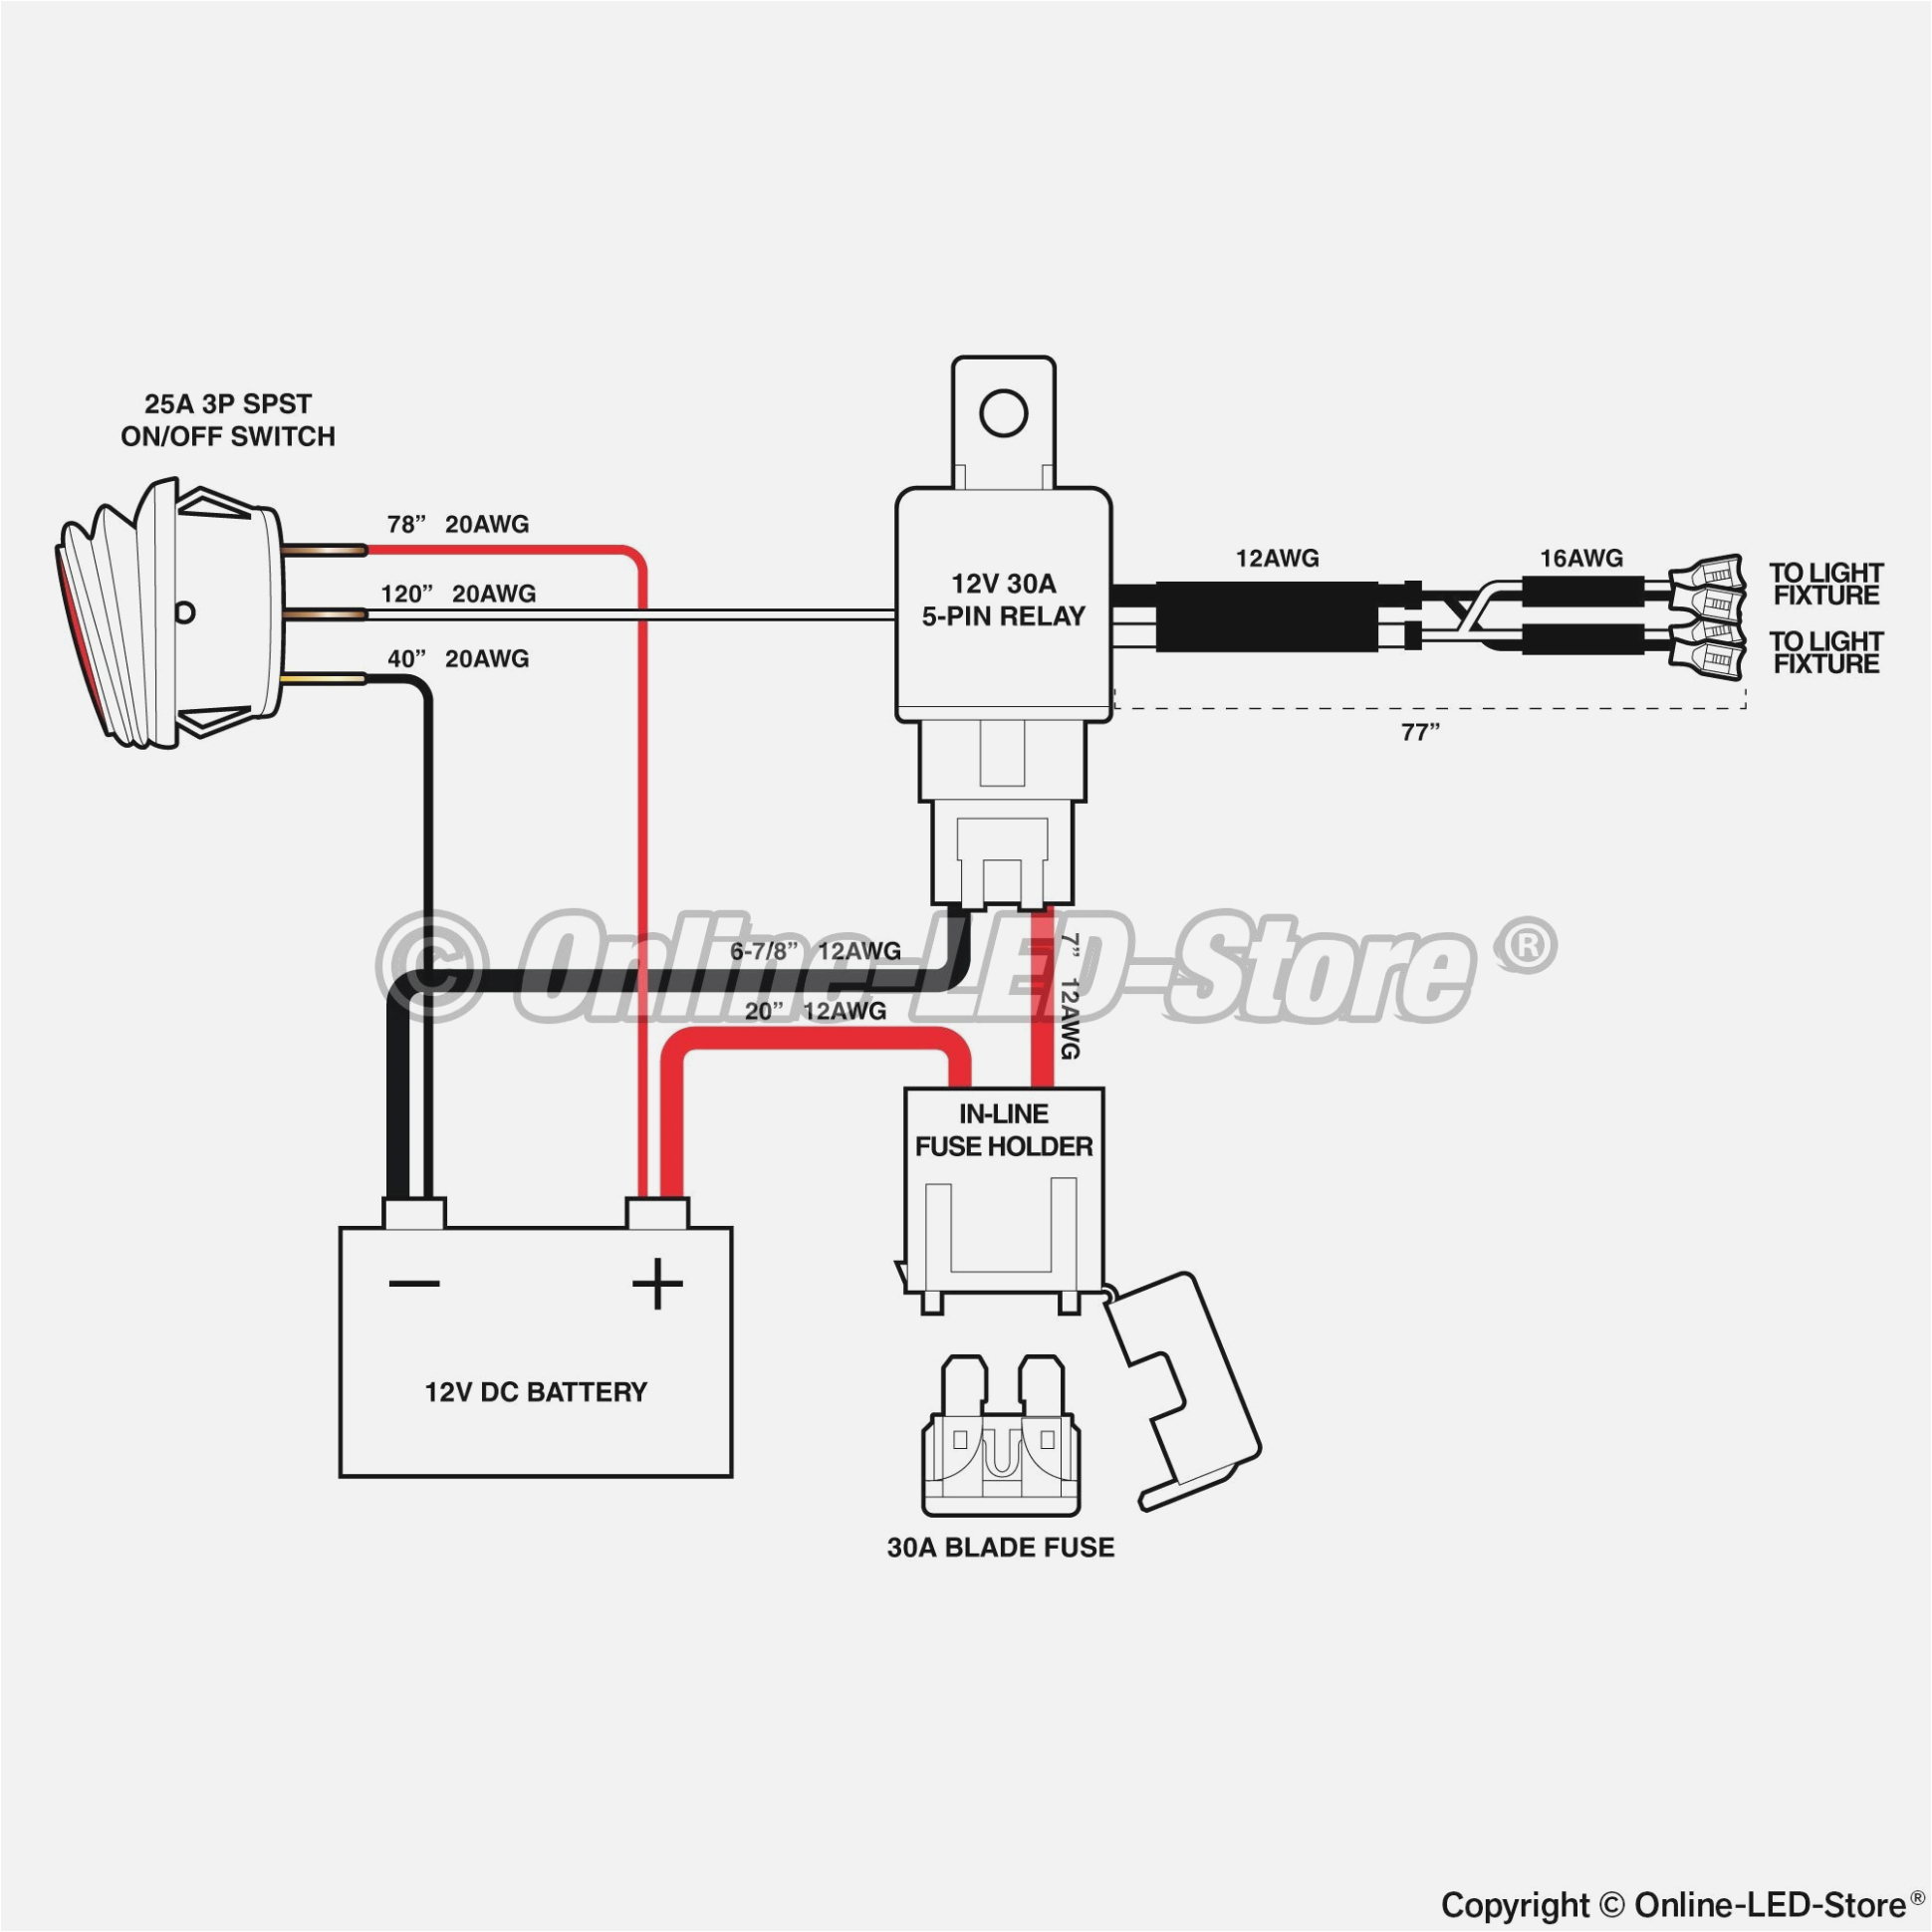 pin power switch wiring on pinterest wiring diagram schematic pin dpdt switch circuit diagrams on pinterest